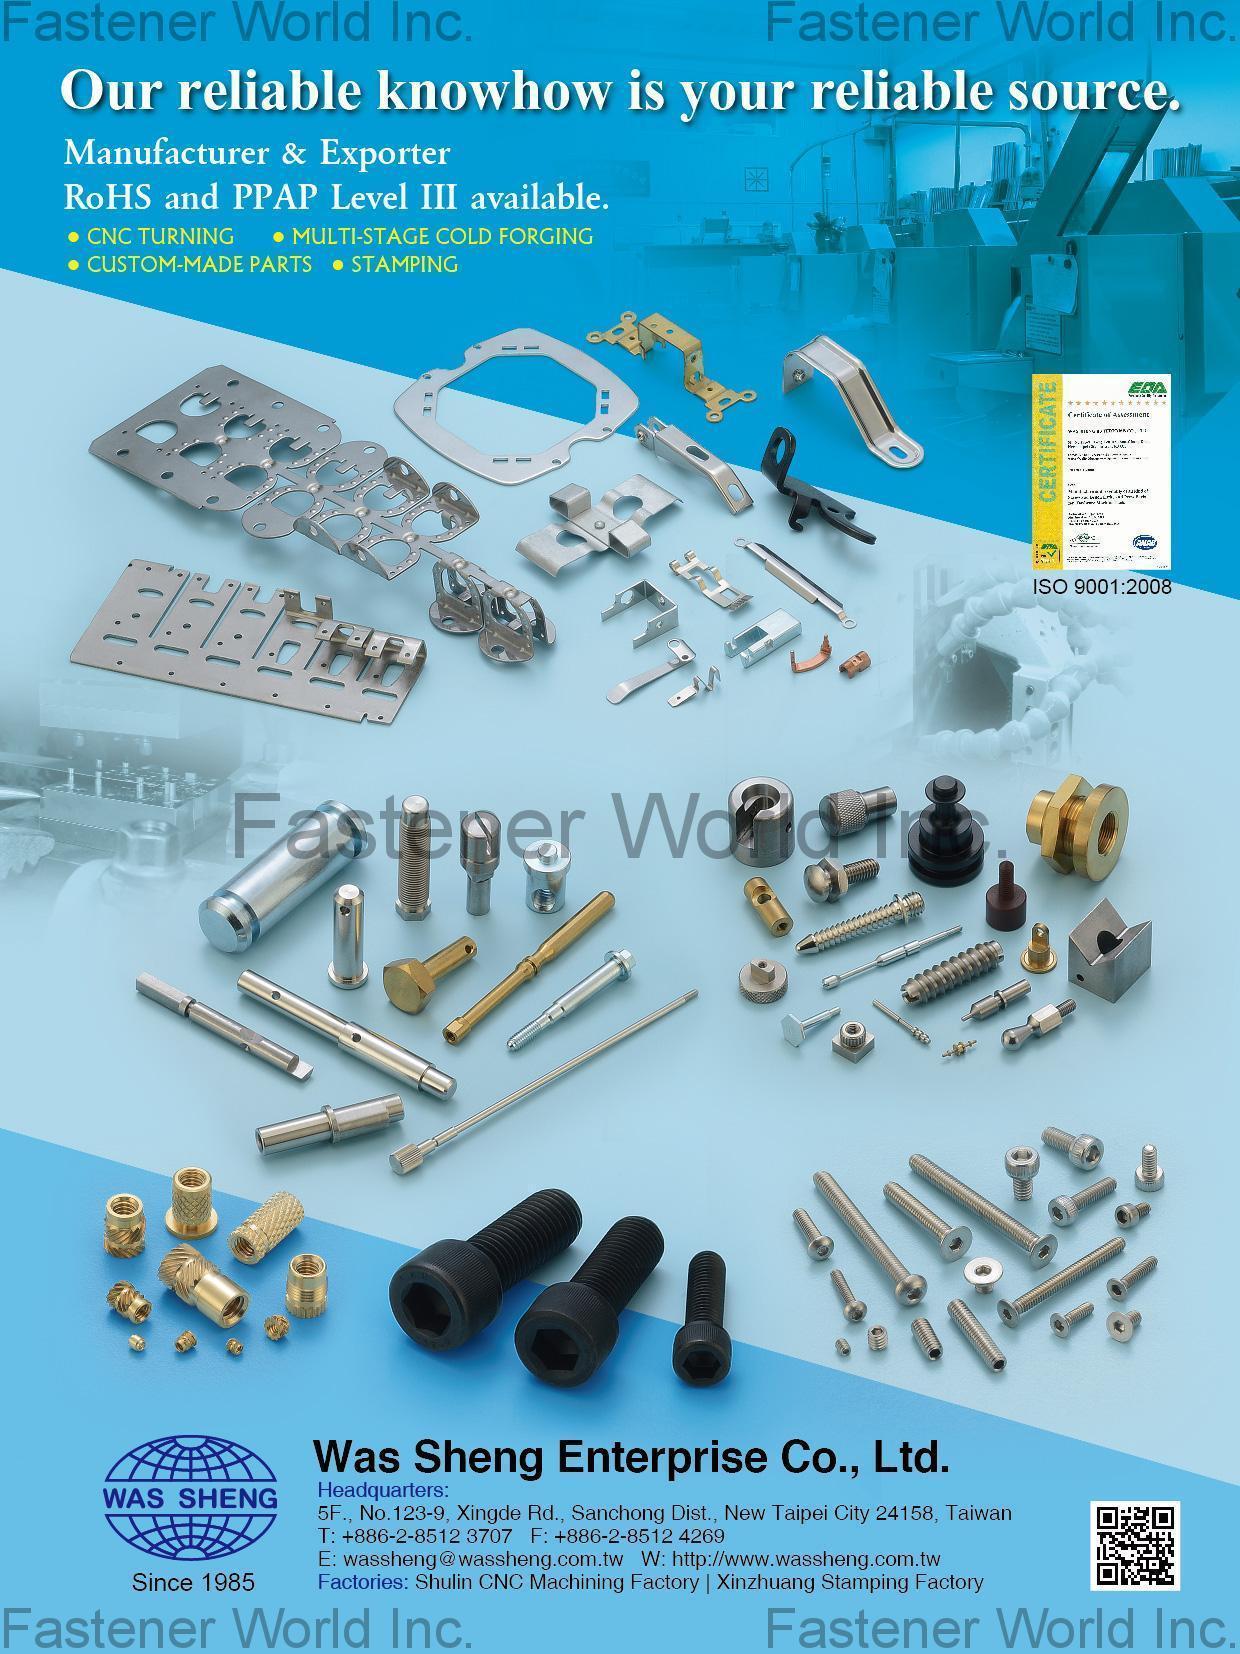 WAS SHENG ENTERPRISE CO., LTD. , Precision Machining, Progressive Metal Stamping, Multi-Stage Cold Forging, Brass Inserts, Screws, Special Formed Parts, Brass Inserts, Dowel Pins, Standoffs, Special Parts , Cnc Machining Parts